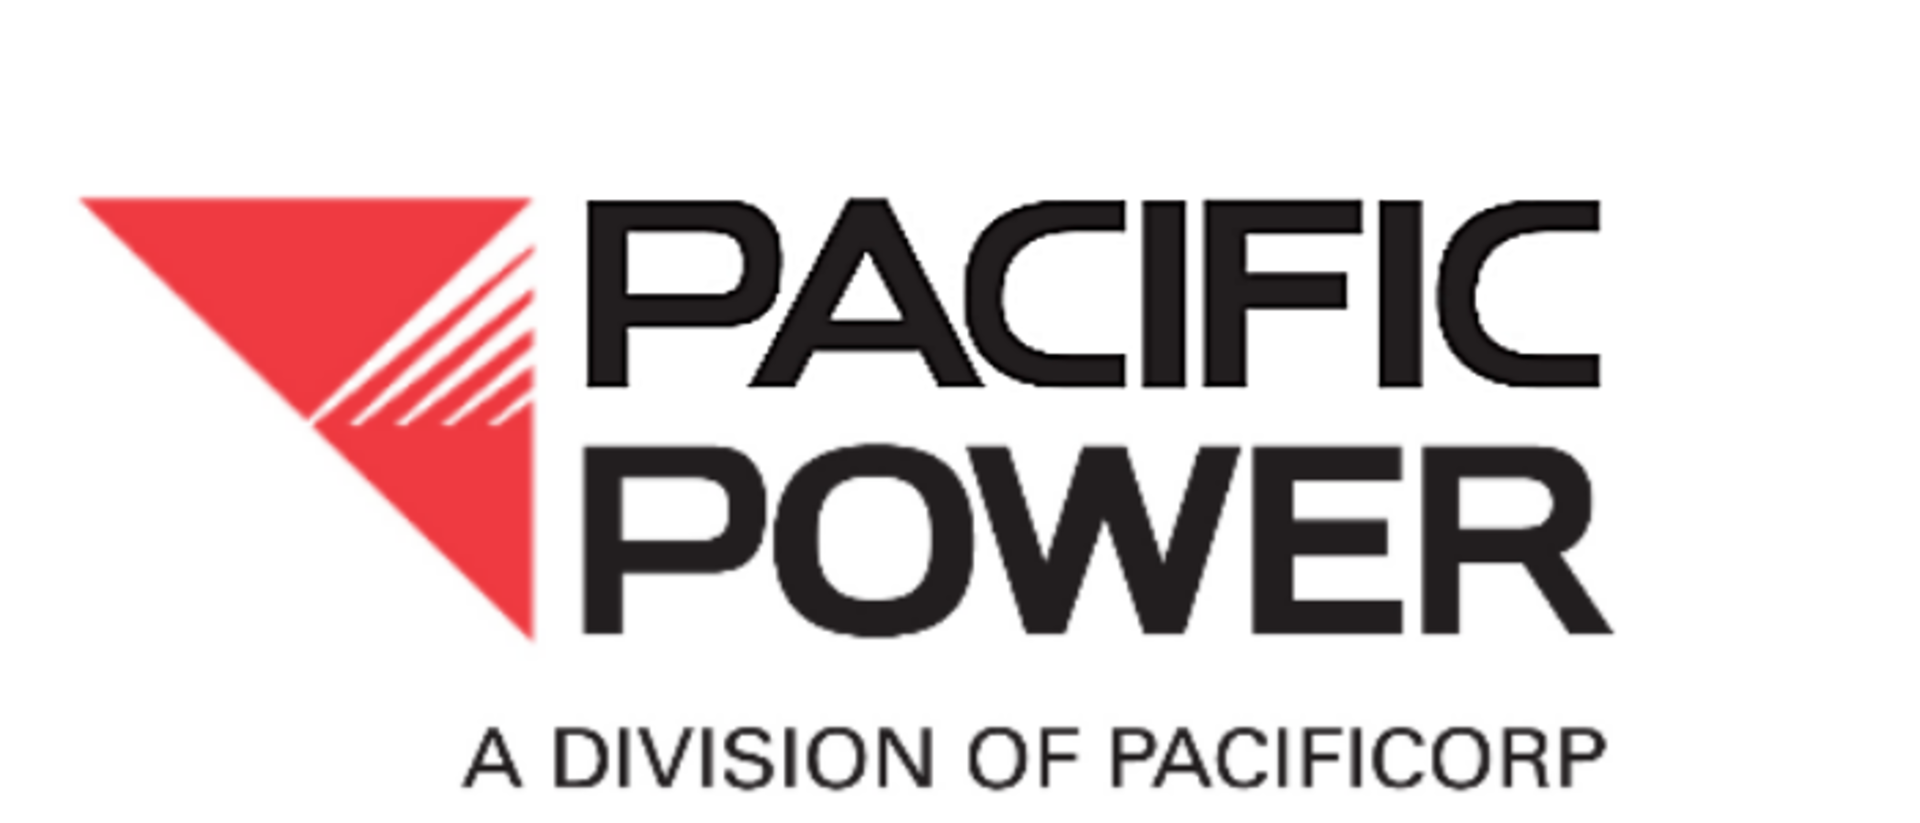 Pacific Power.png